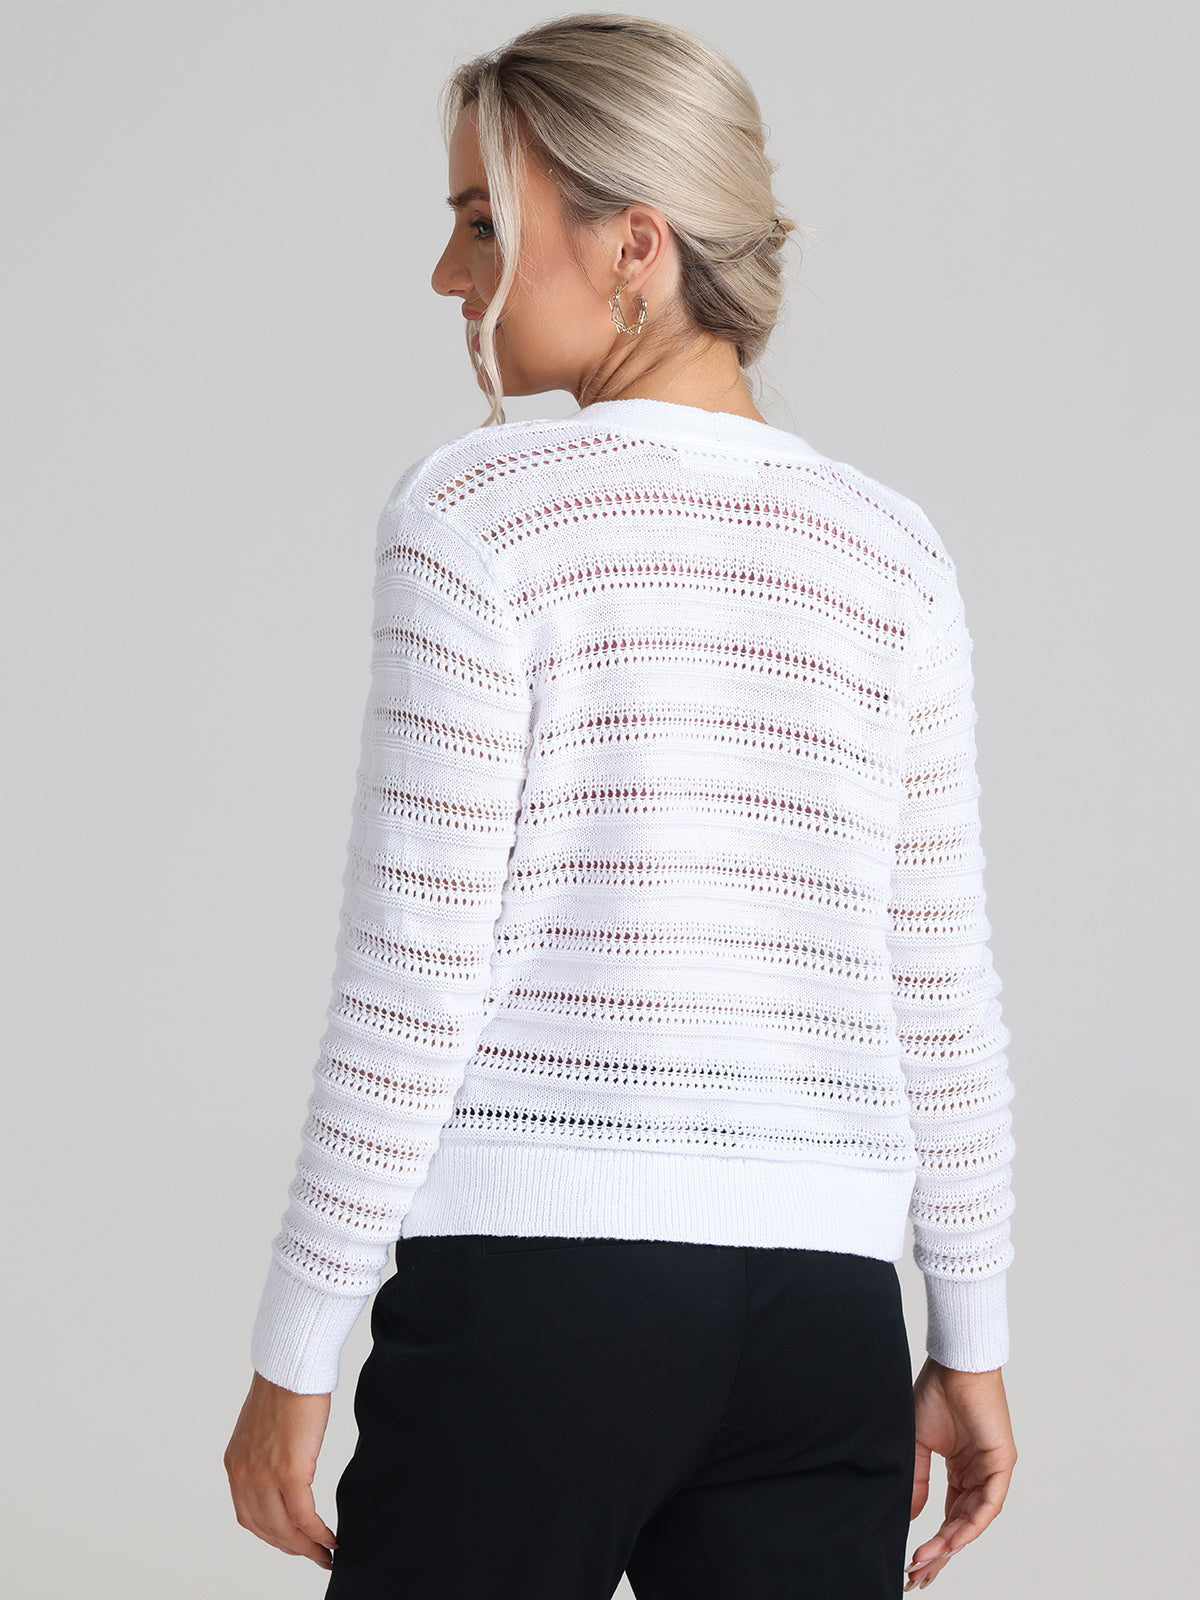 Pointelle Open Front Cardigan